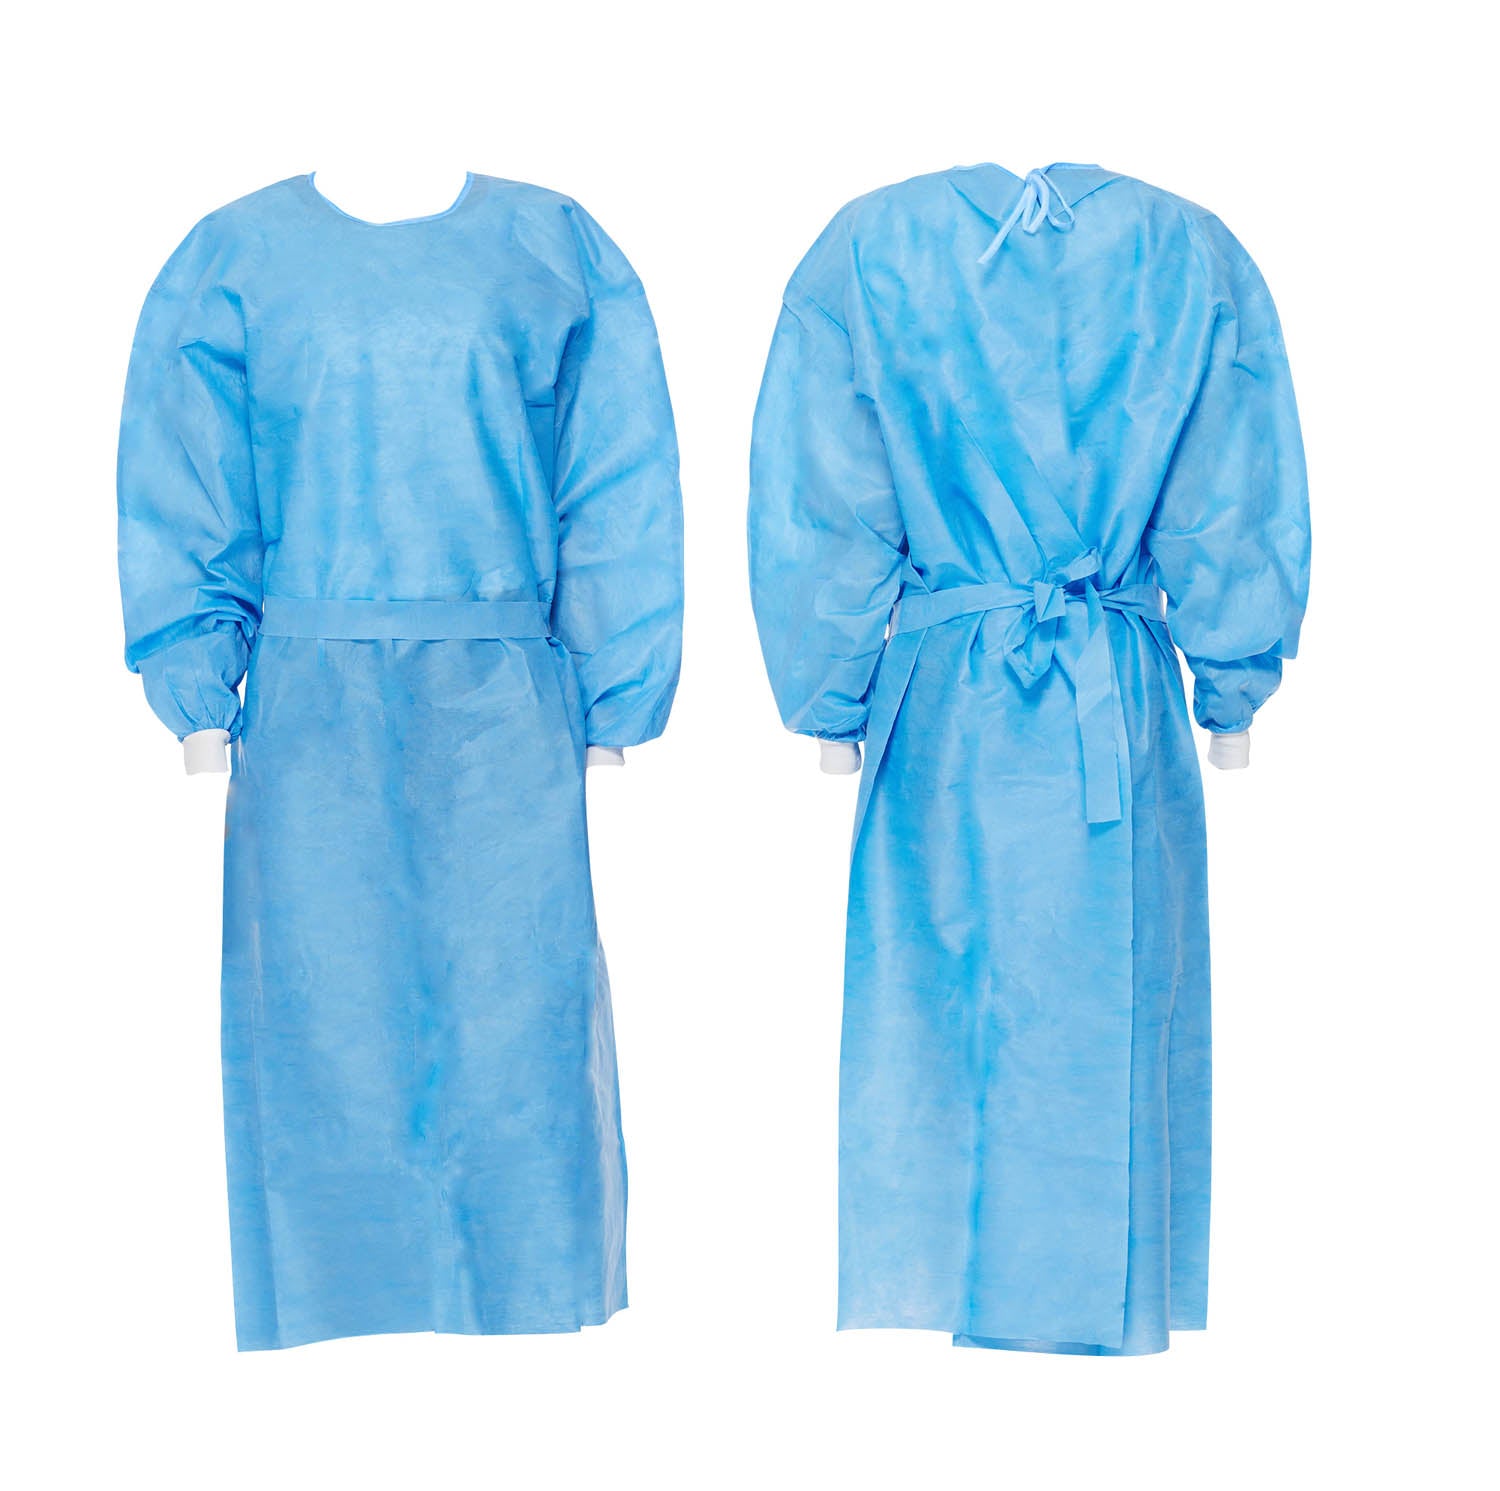 AAMI LEVEL 2 / LEVEL 3 ISOLATION GOWN